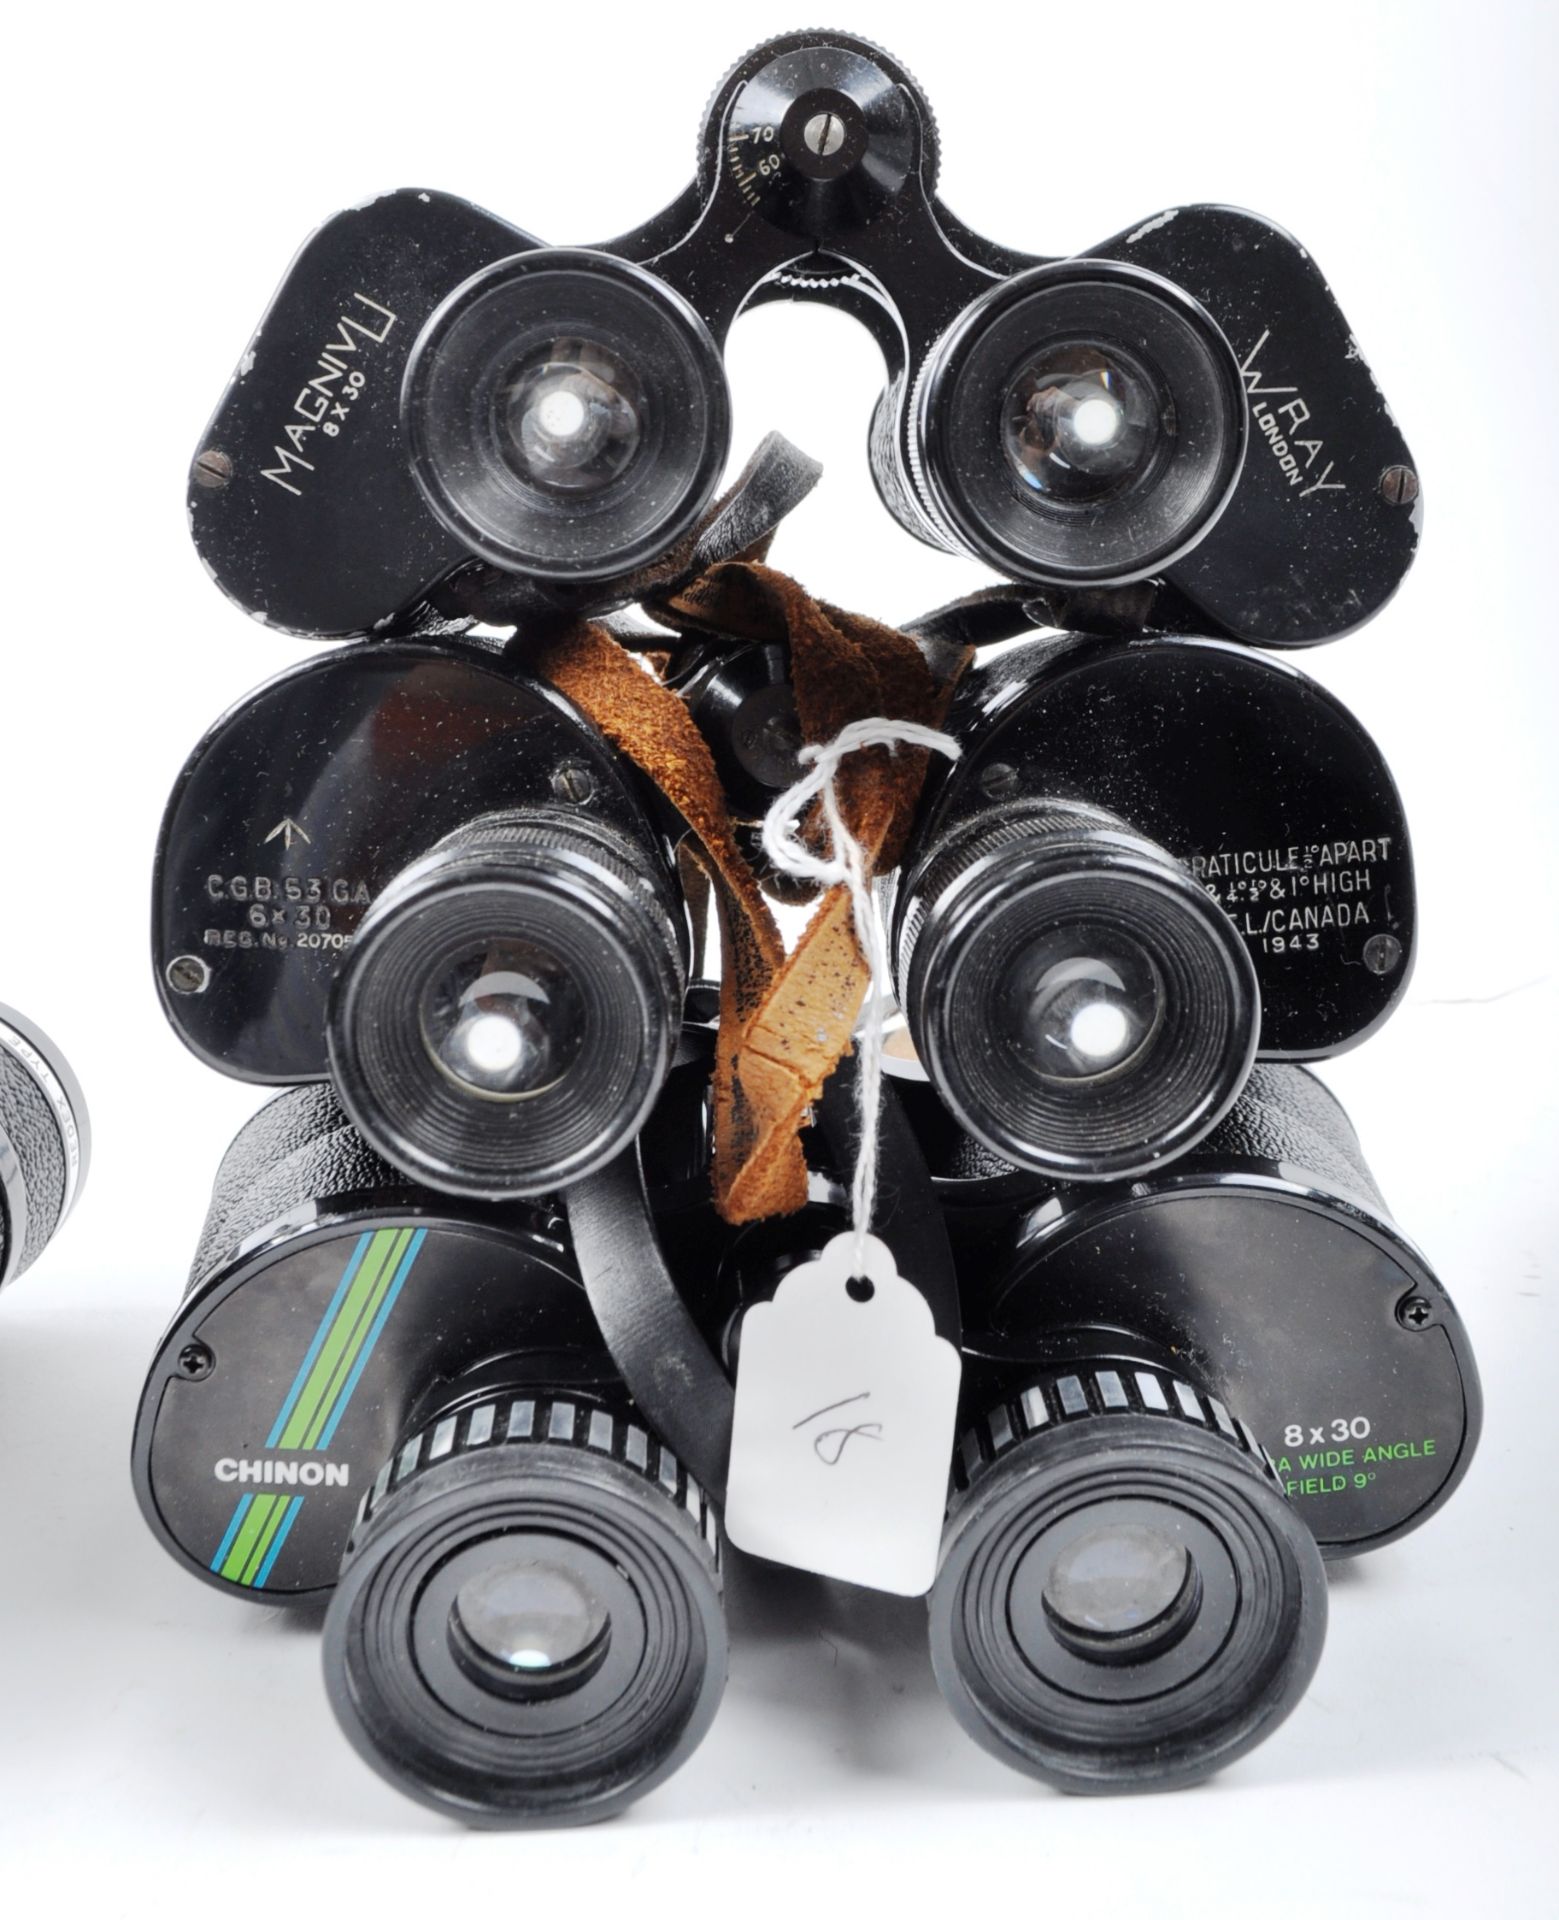 COLLECTION OF ASSORTED VINTAGE BINOCULARS INCLUDING MILITARY ISSUE - Image 4 of 5